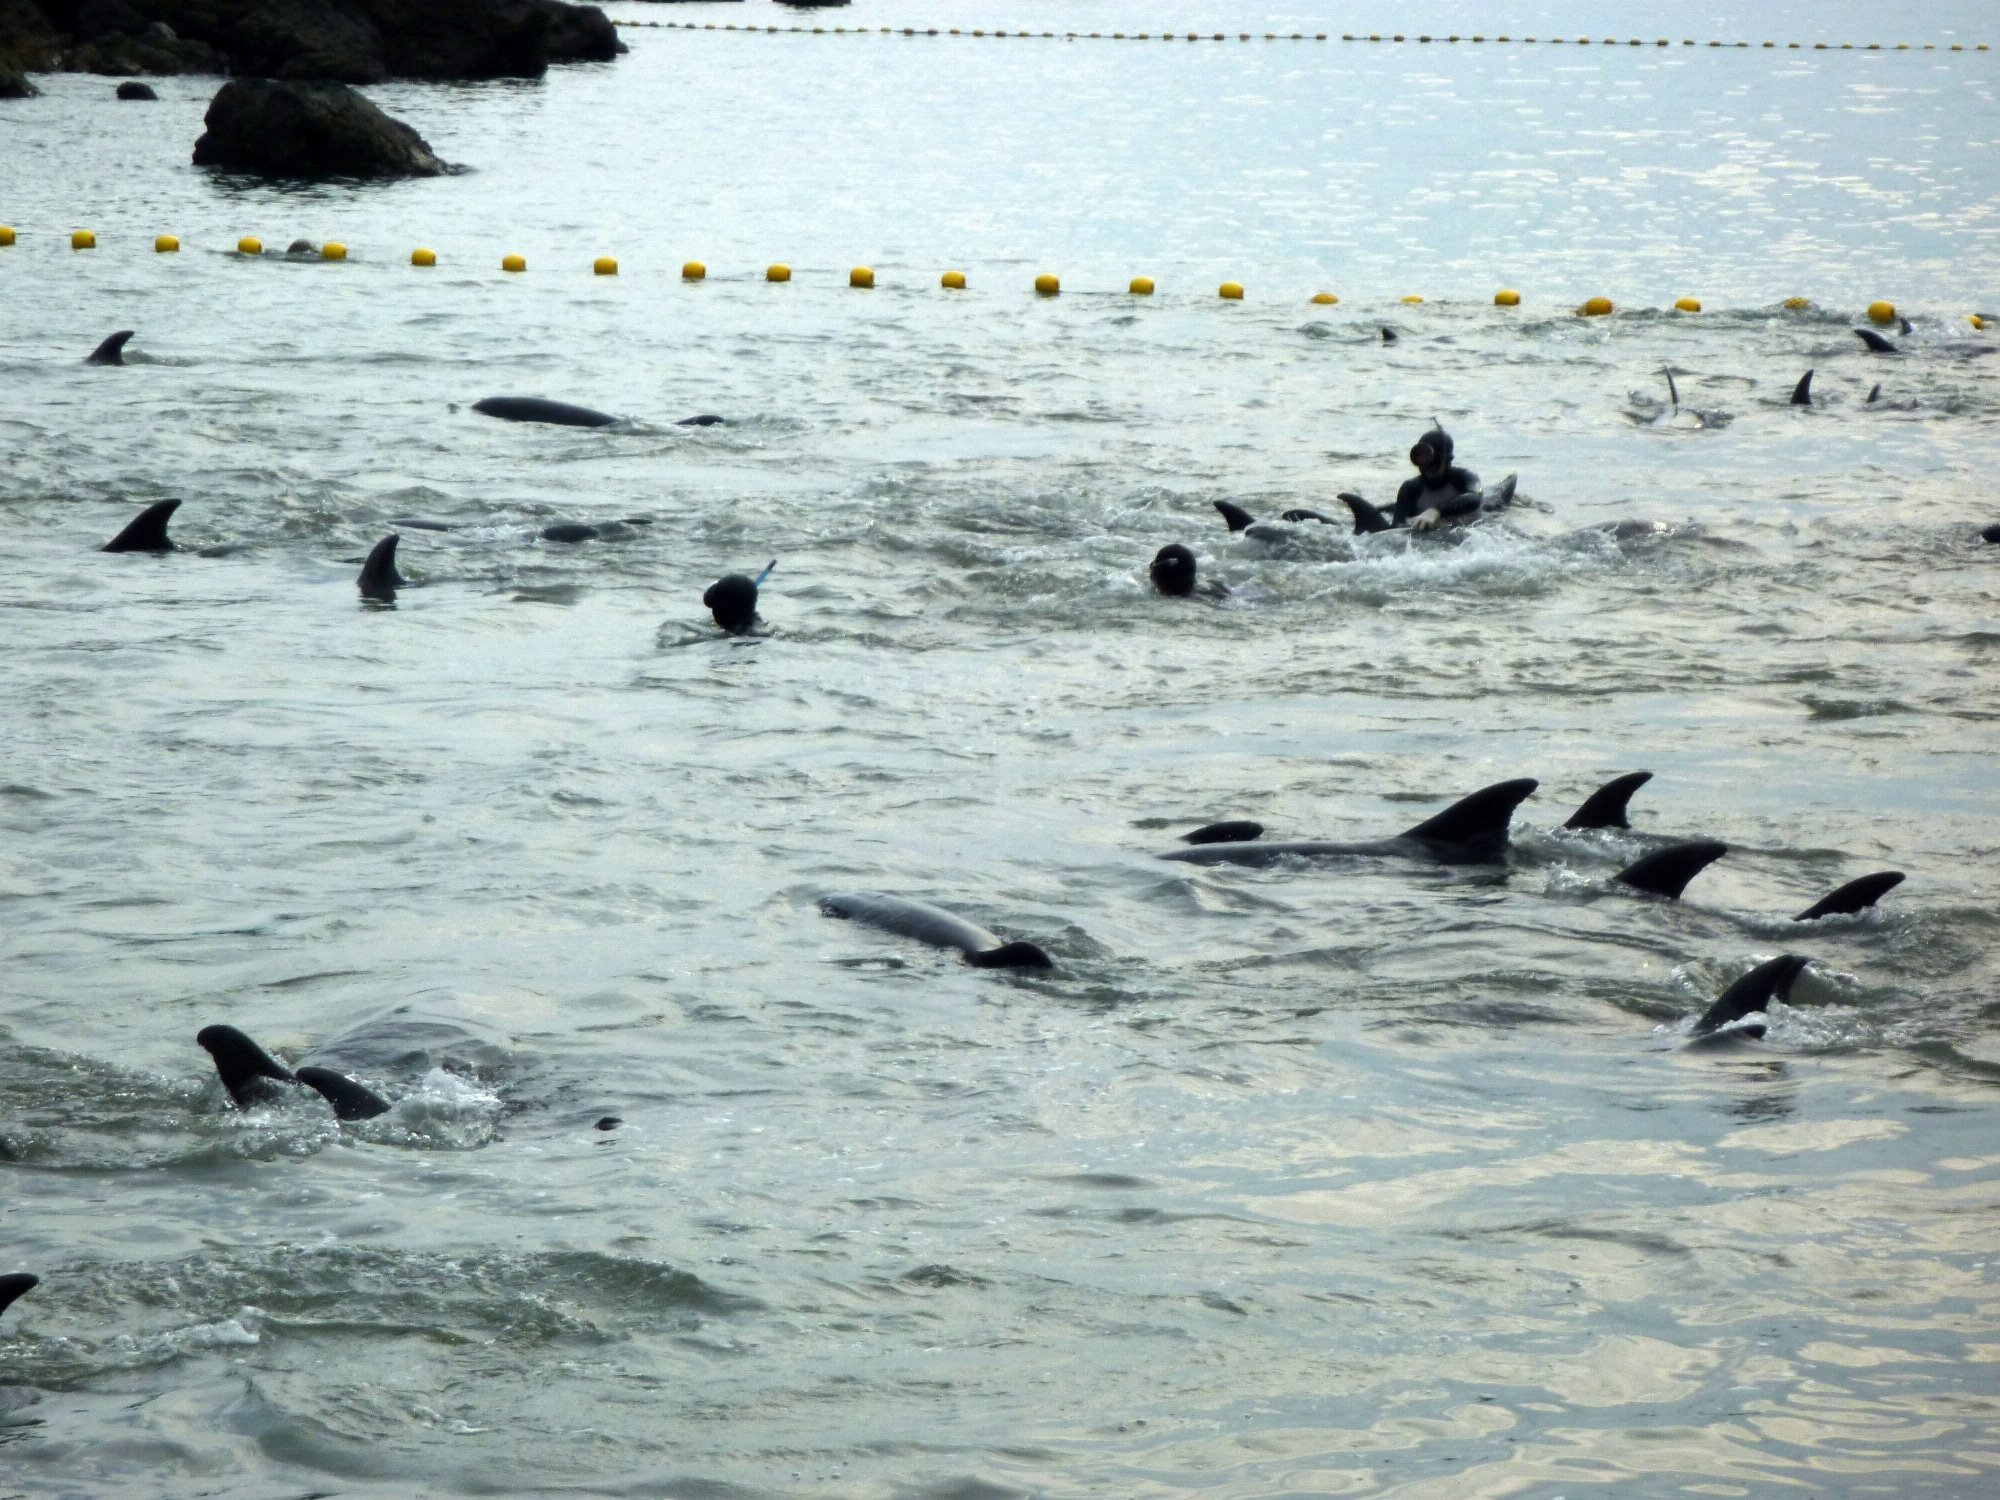 Taiji whales capturing dolphins for salughter or captivity